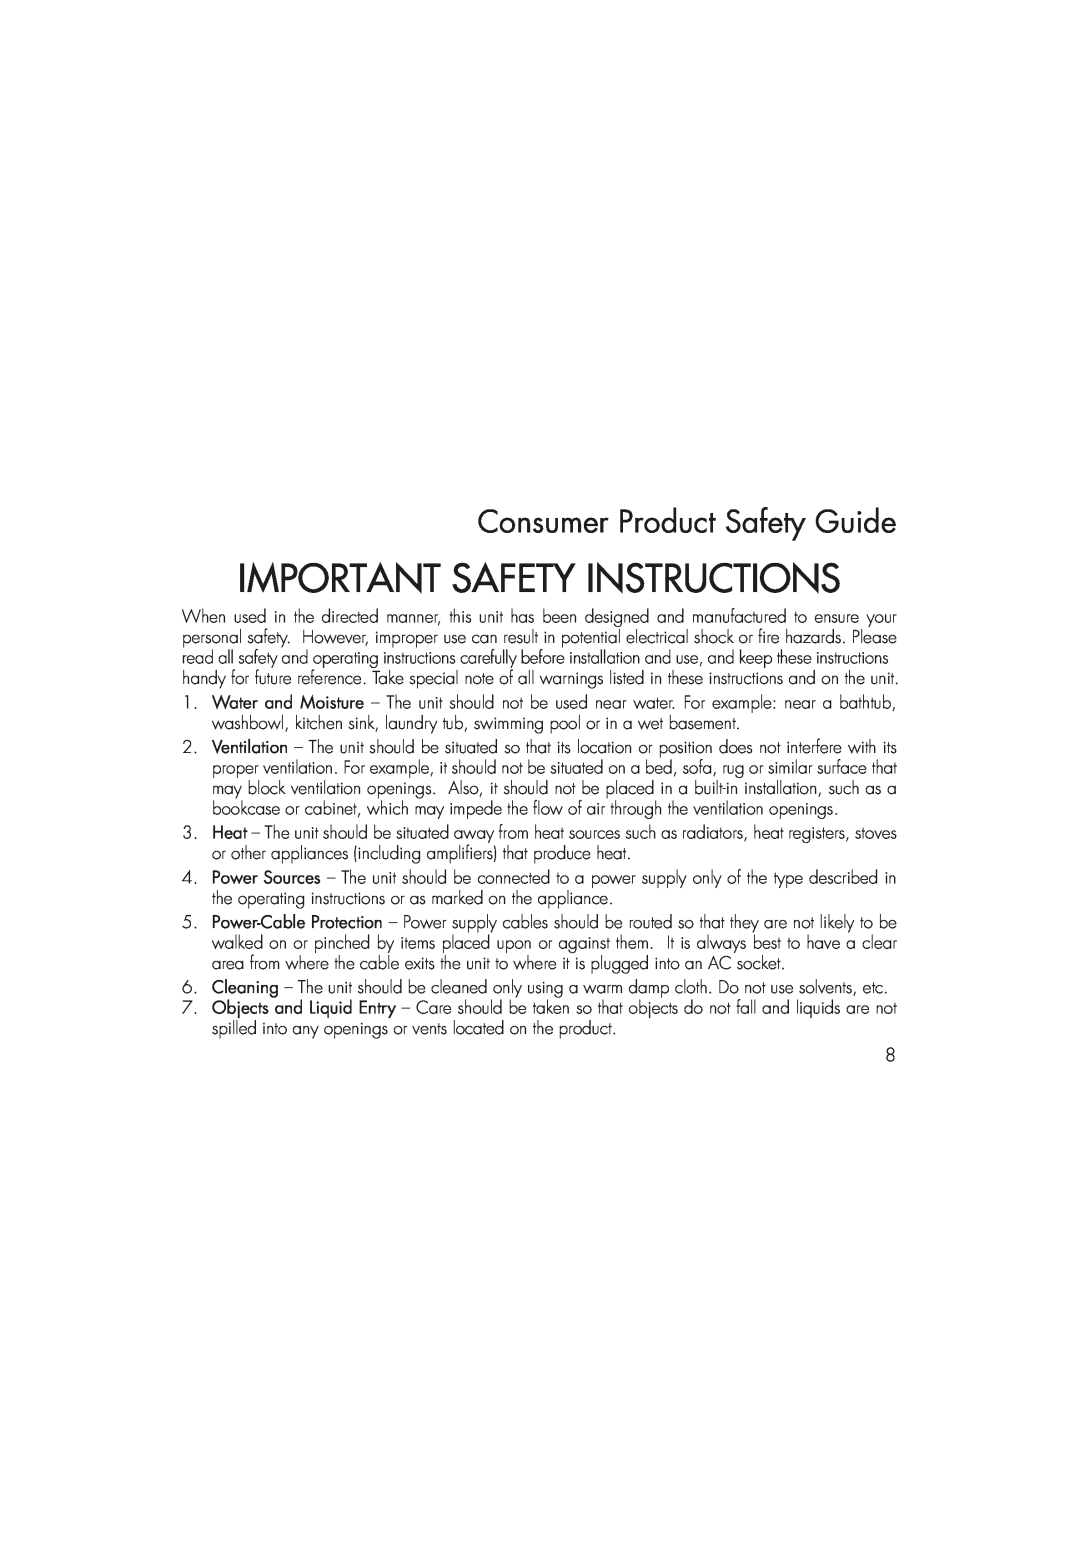 iHome iDM8N1 instruction manual Consumer Product Safety Guide, Important Safety Instructions 